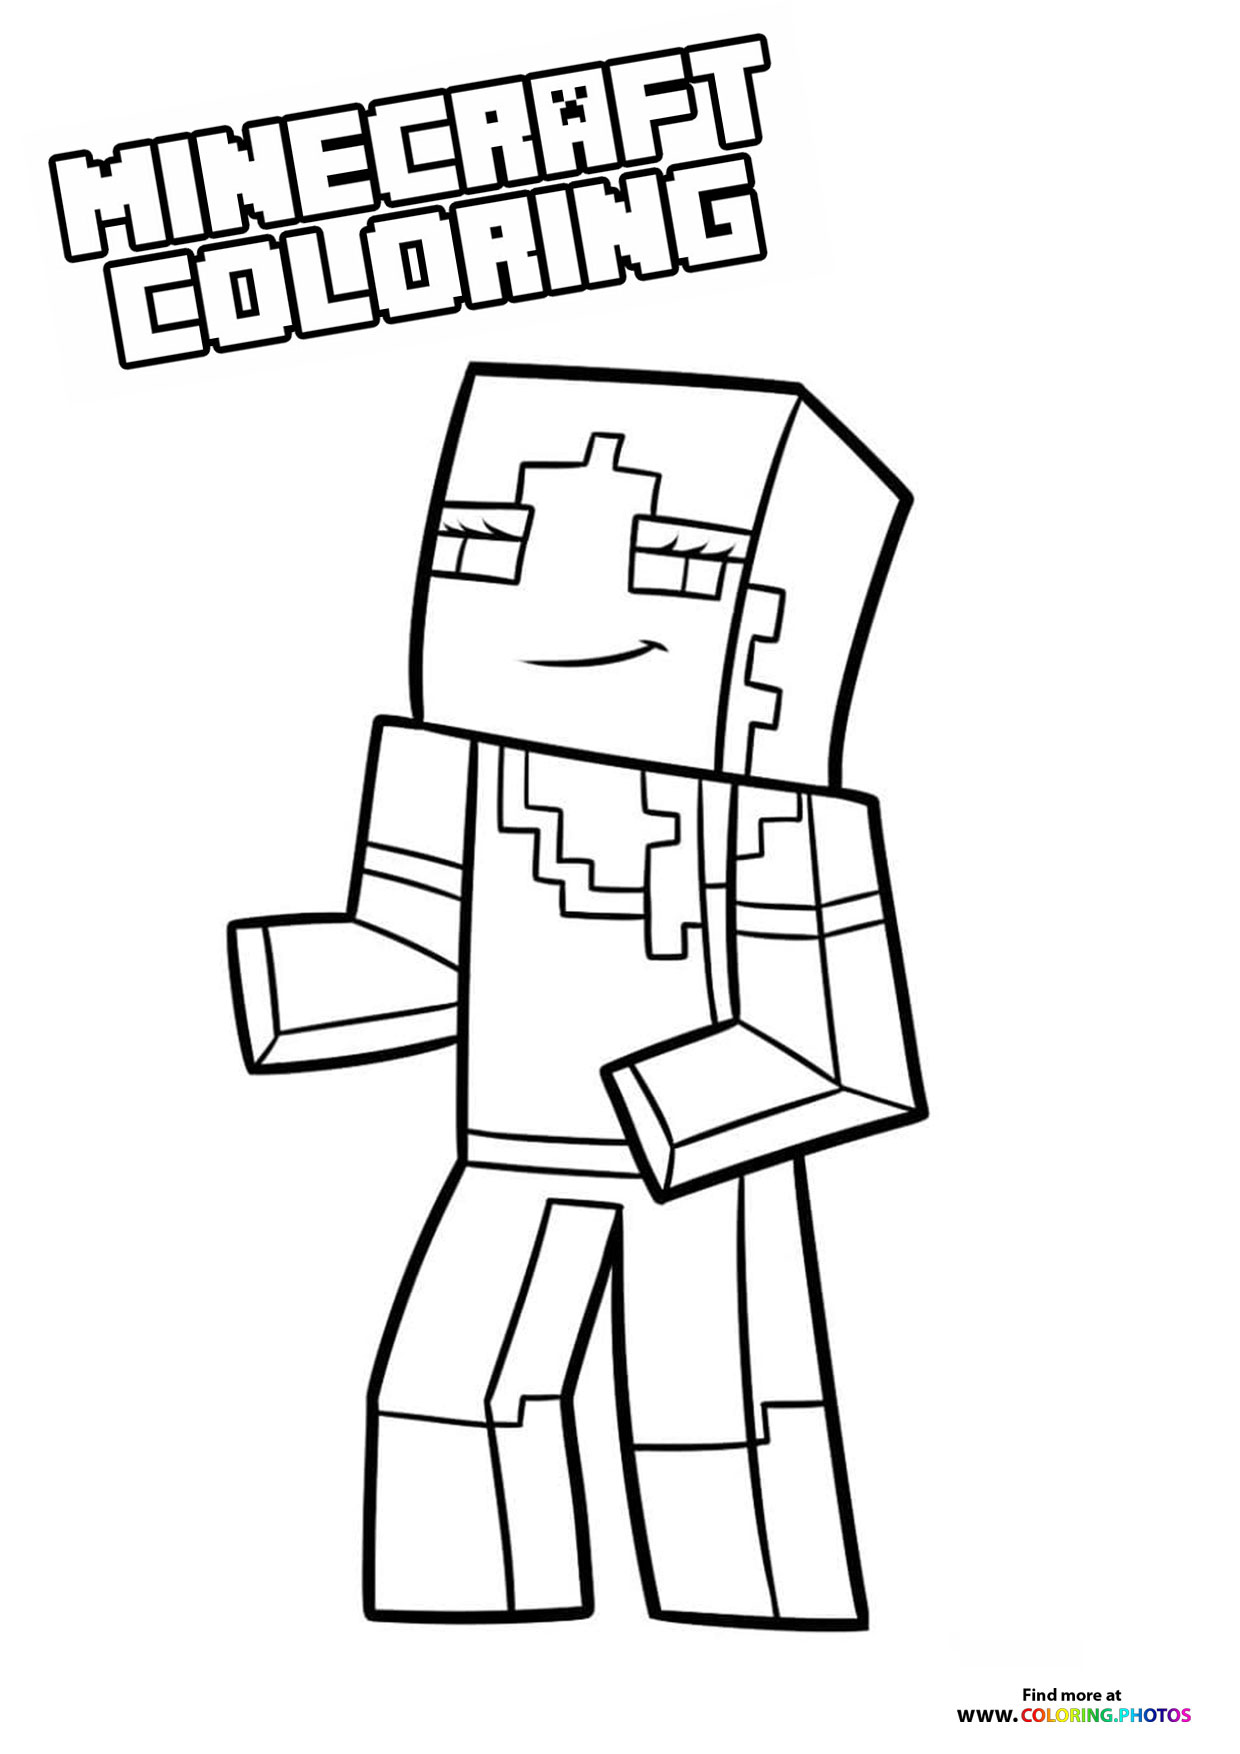 Minecraft girl character - Coloring Pages for kids